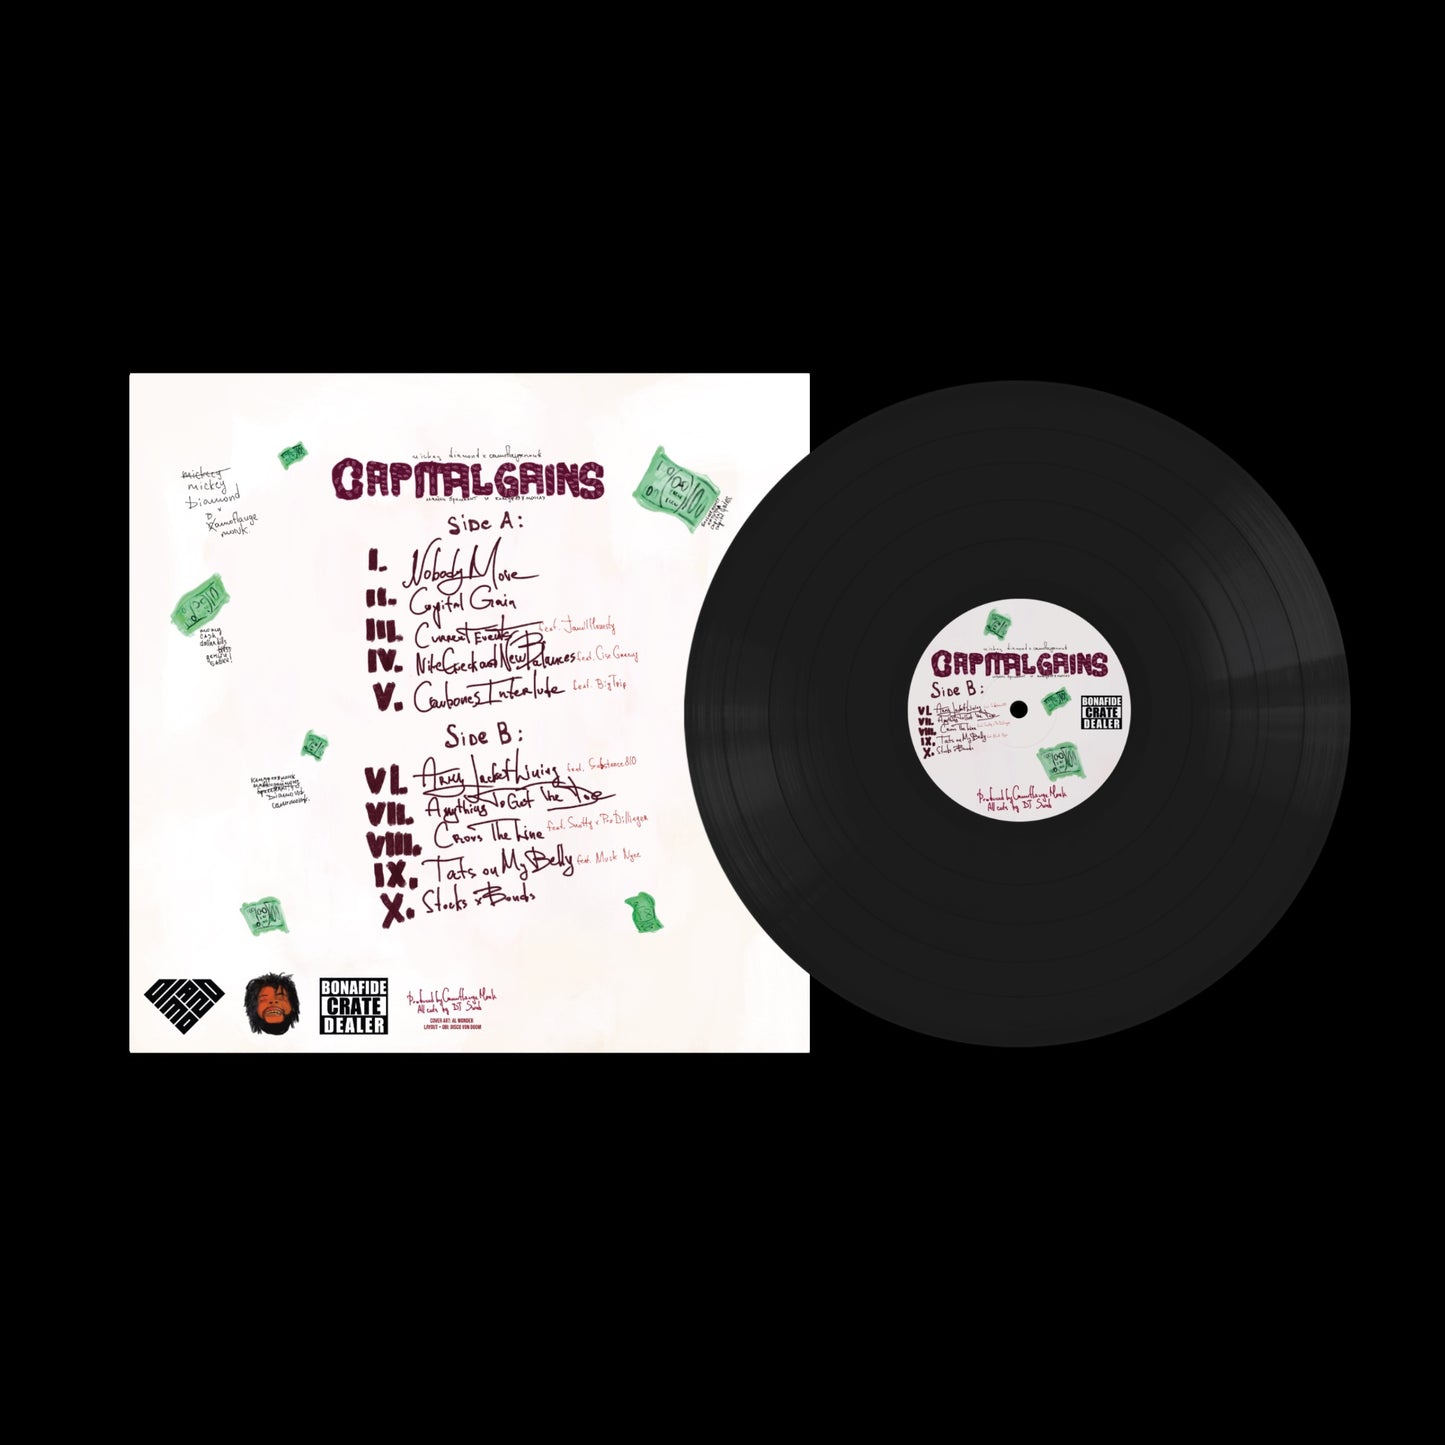 Capital Gains - Black Vinyl (The Last Shall be First Edition) 100 copies